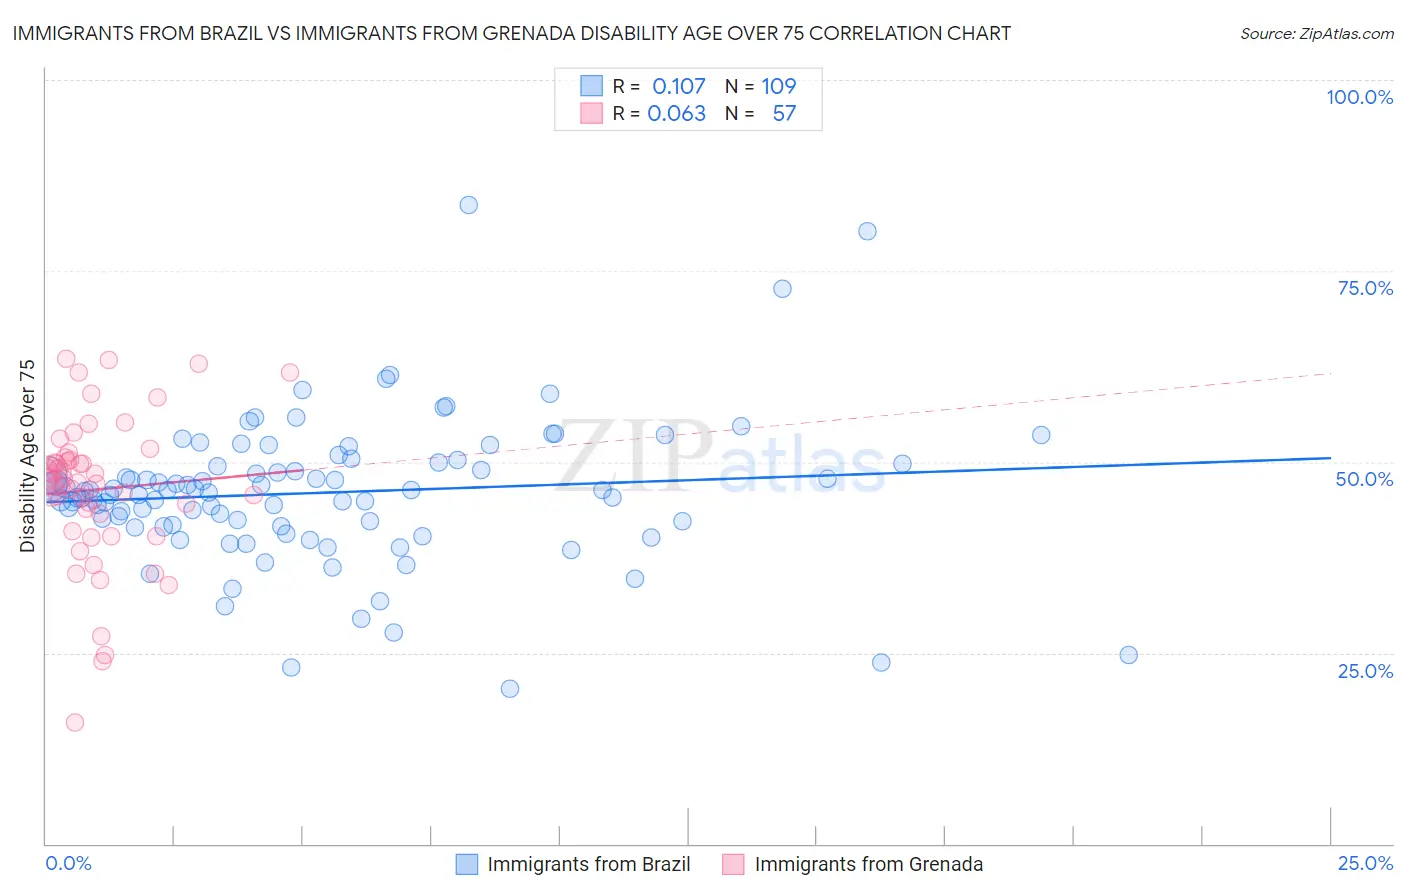 Immigrants from Brazil vs Immigrants from Grenada Disability Age Over 75